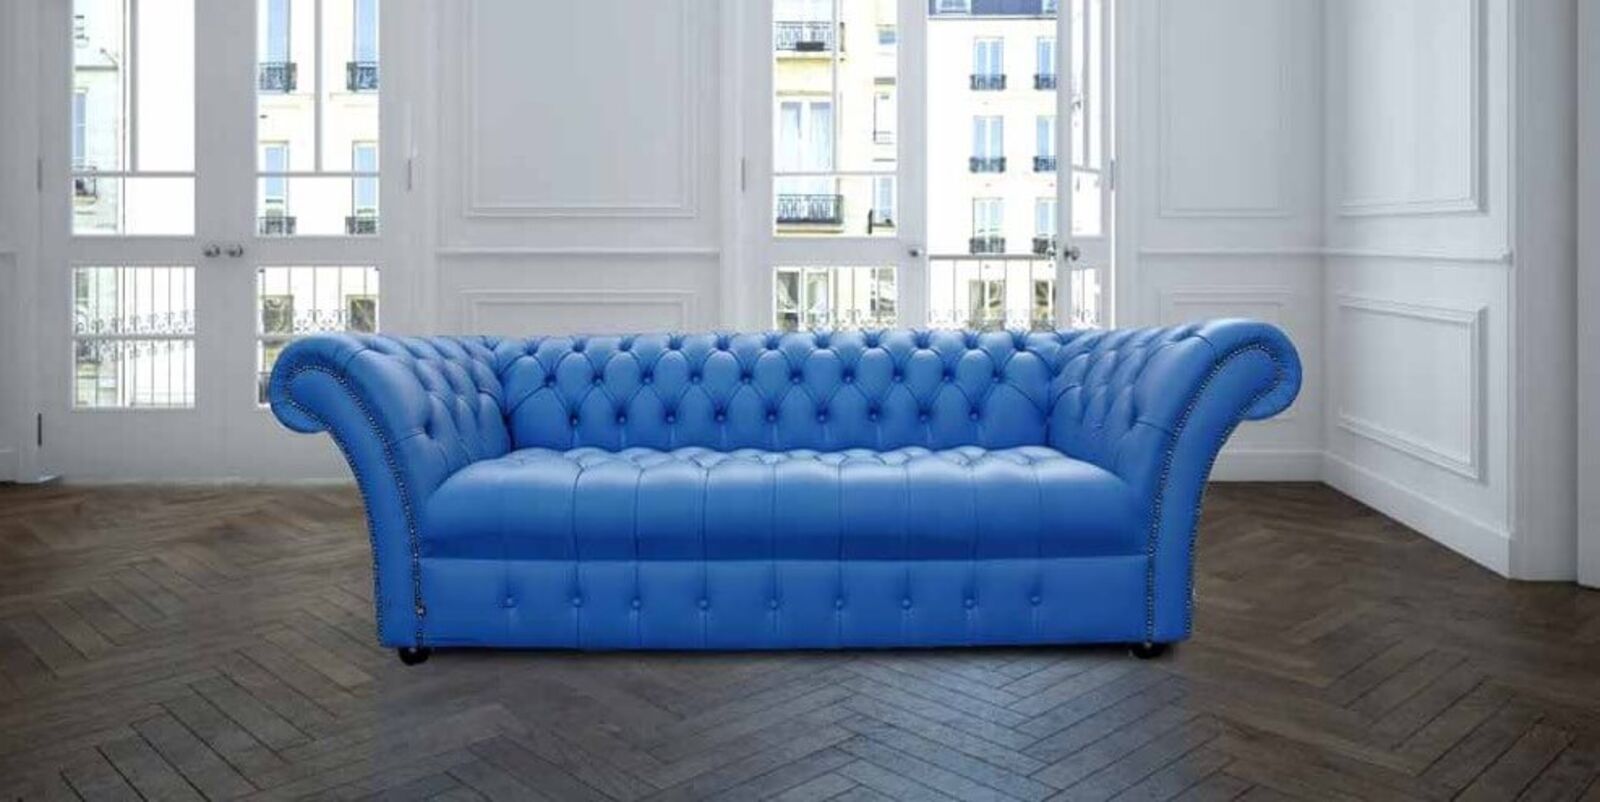 Product photograph of Chesterfield Blenheim 3 Seater Sofa Settee Buttoned Seat Deep Ultramarine Blue Leather from Designer Sofas 4U